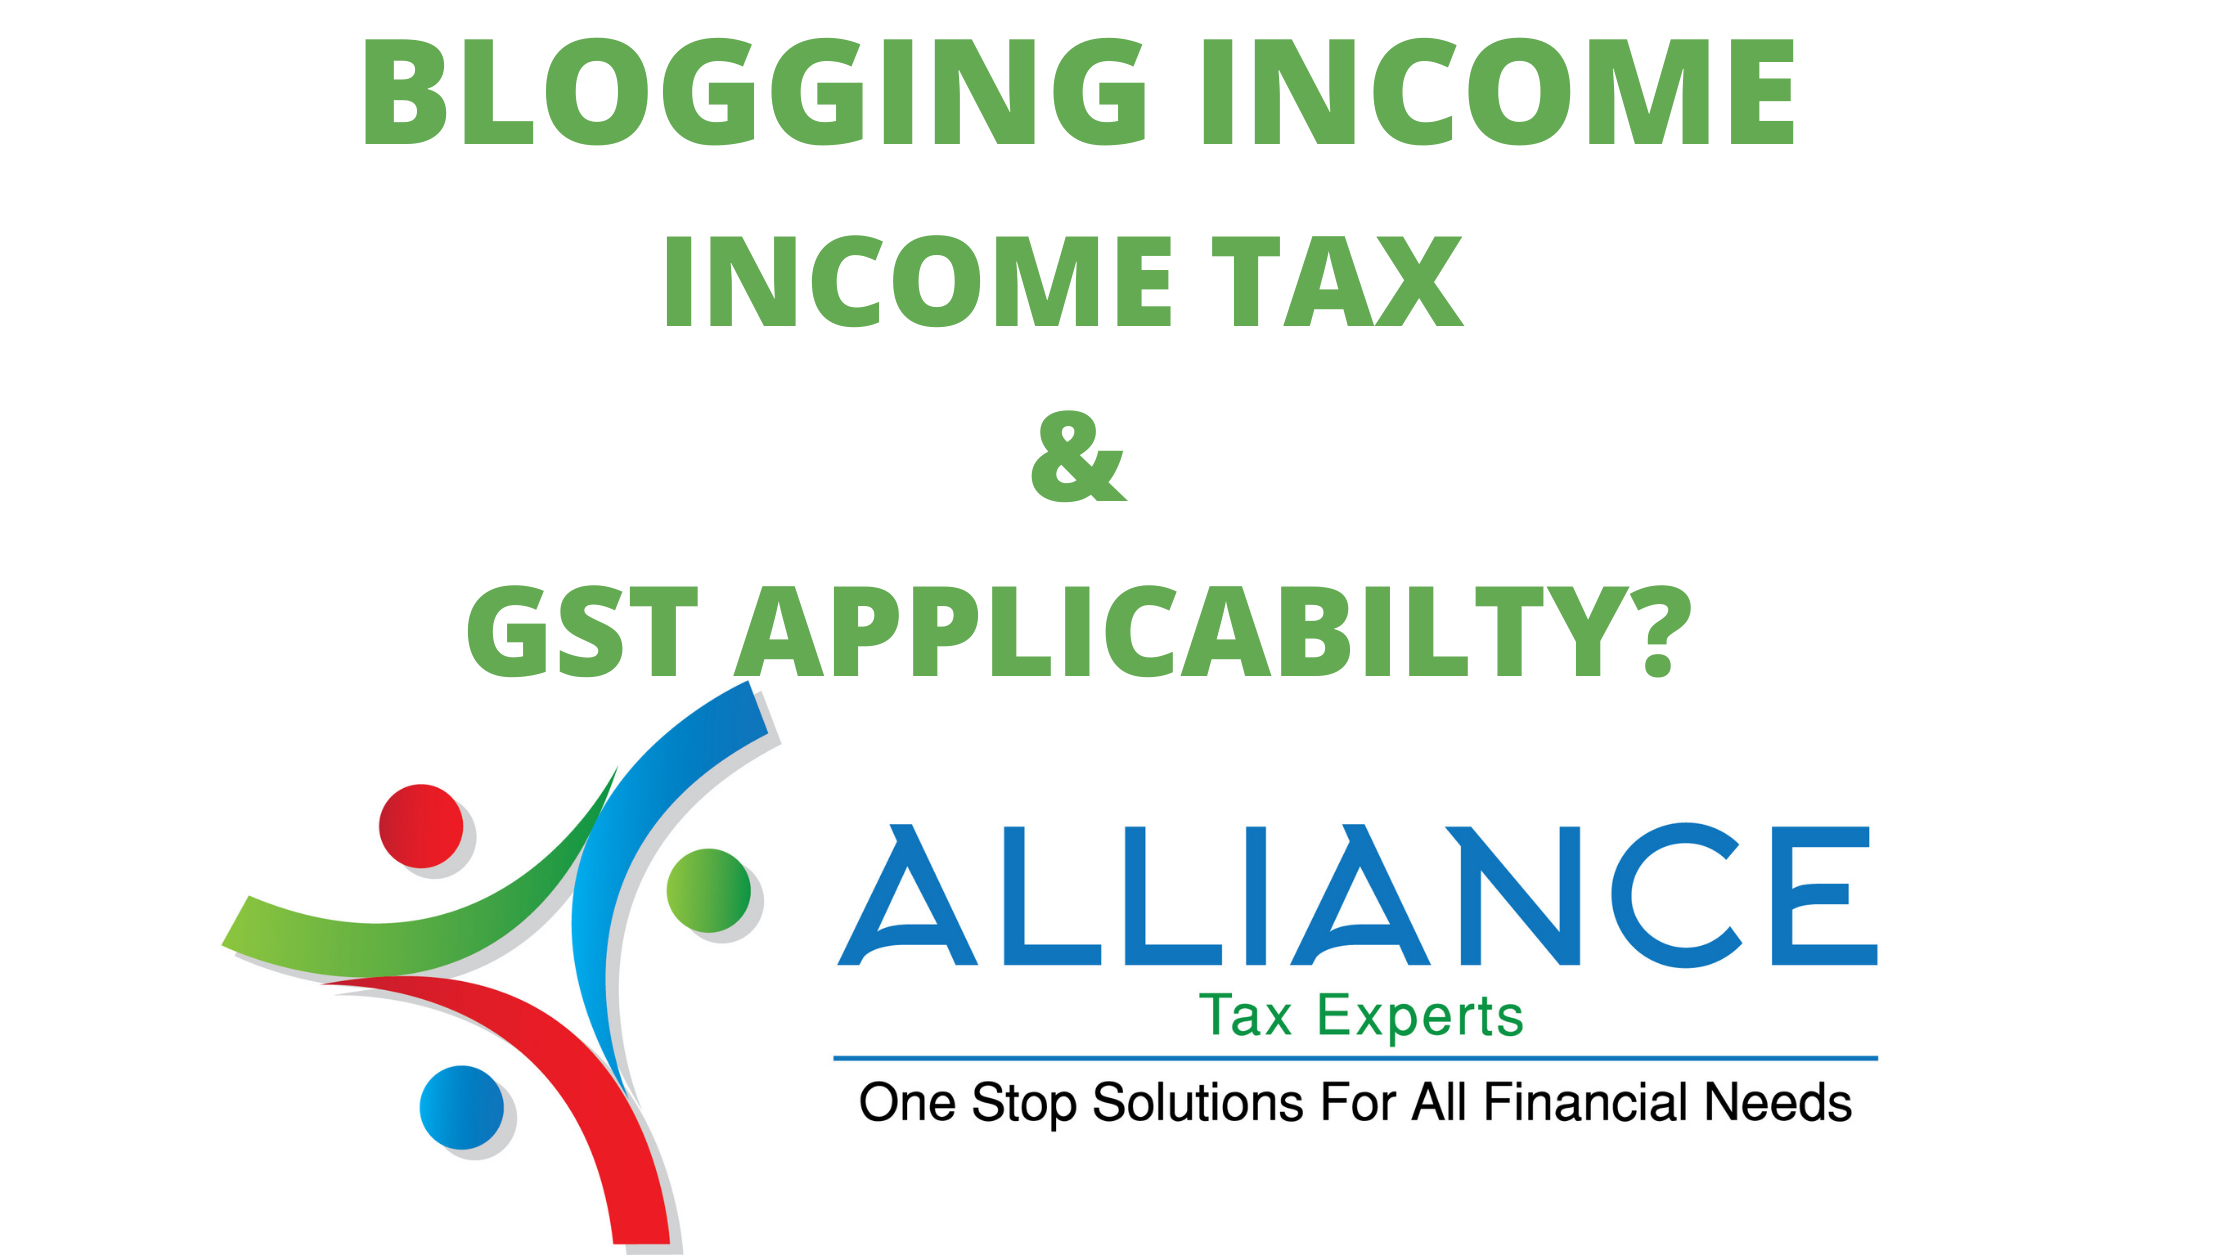 alliance-tax-experts-blogging-income-tax-and-gst-applicabilty